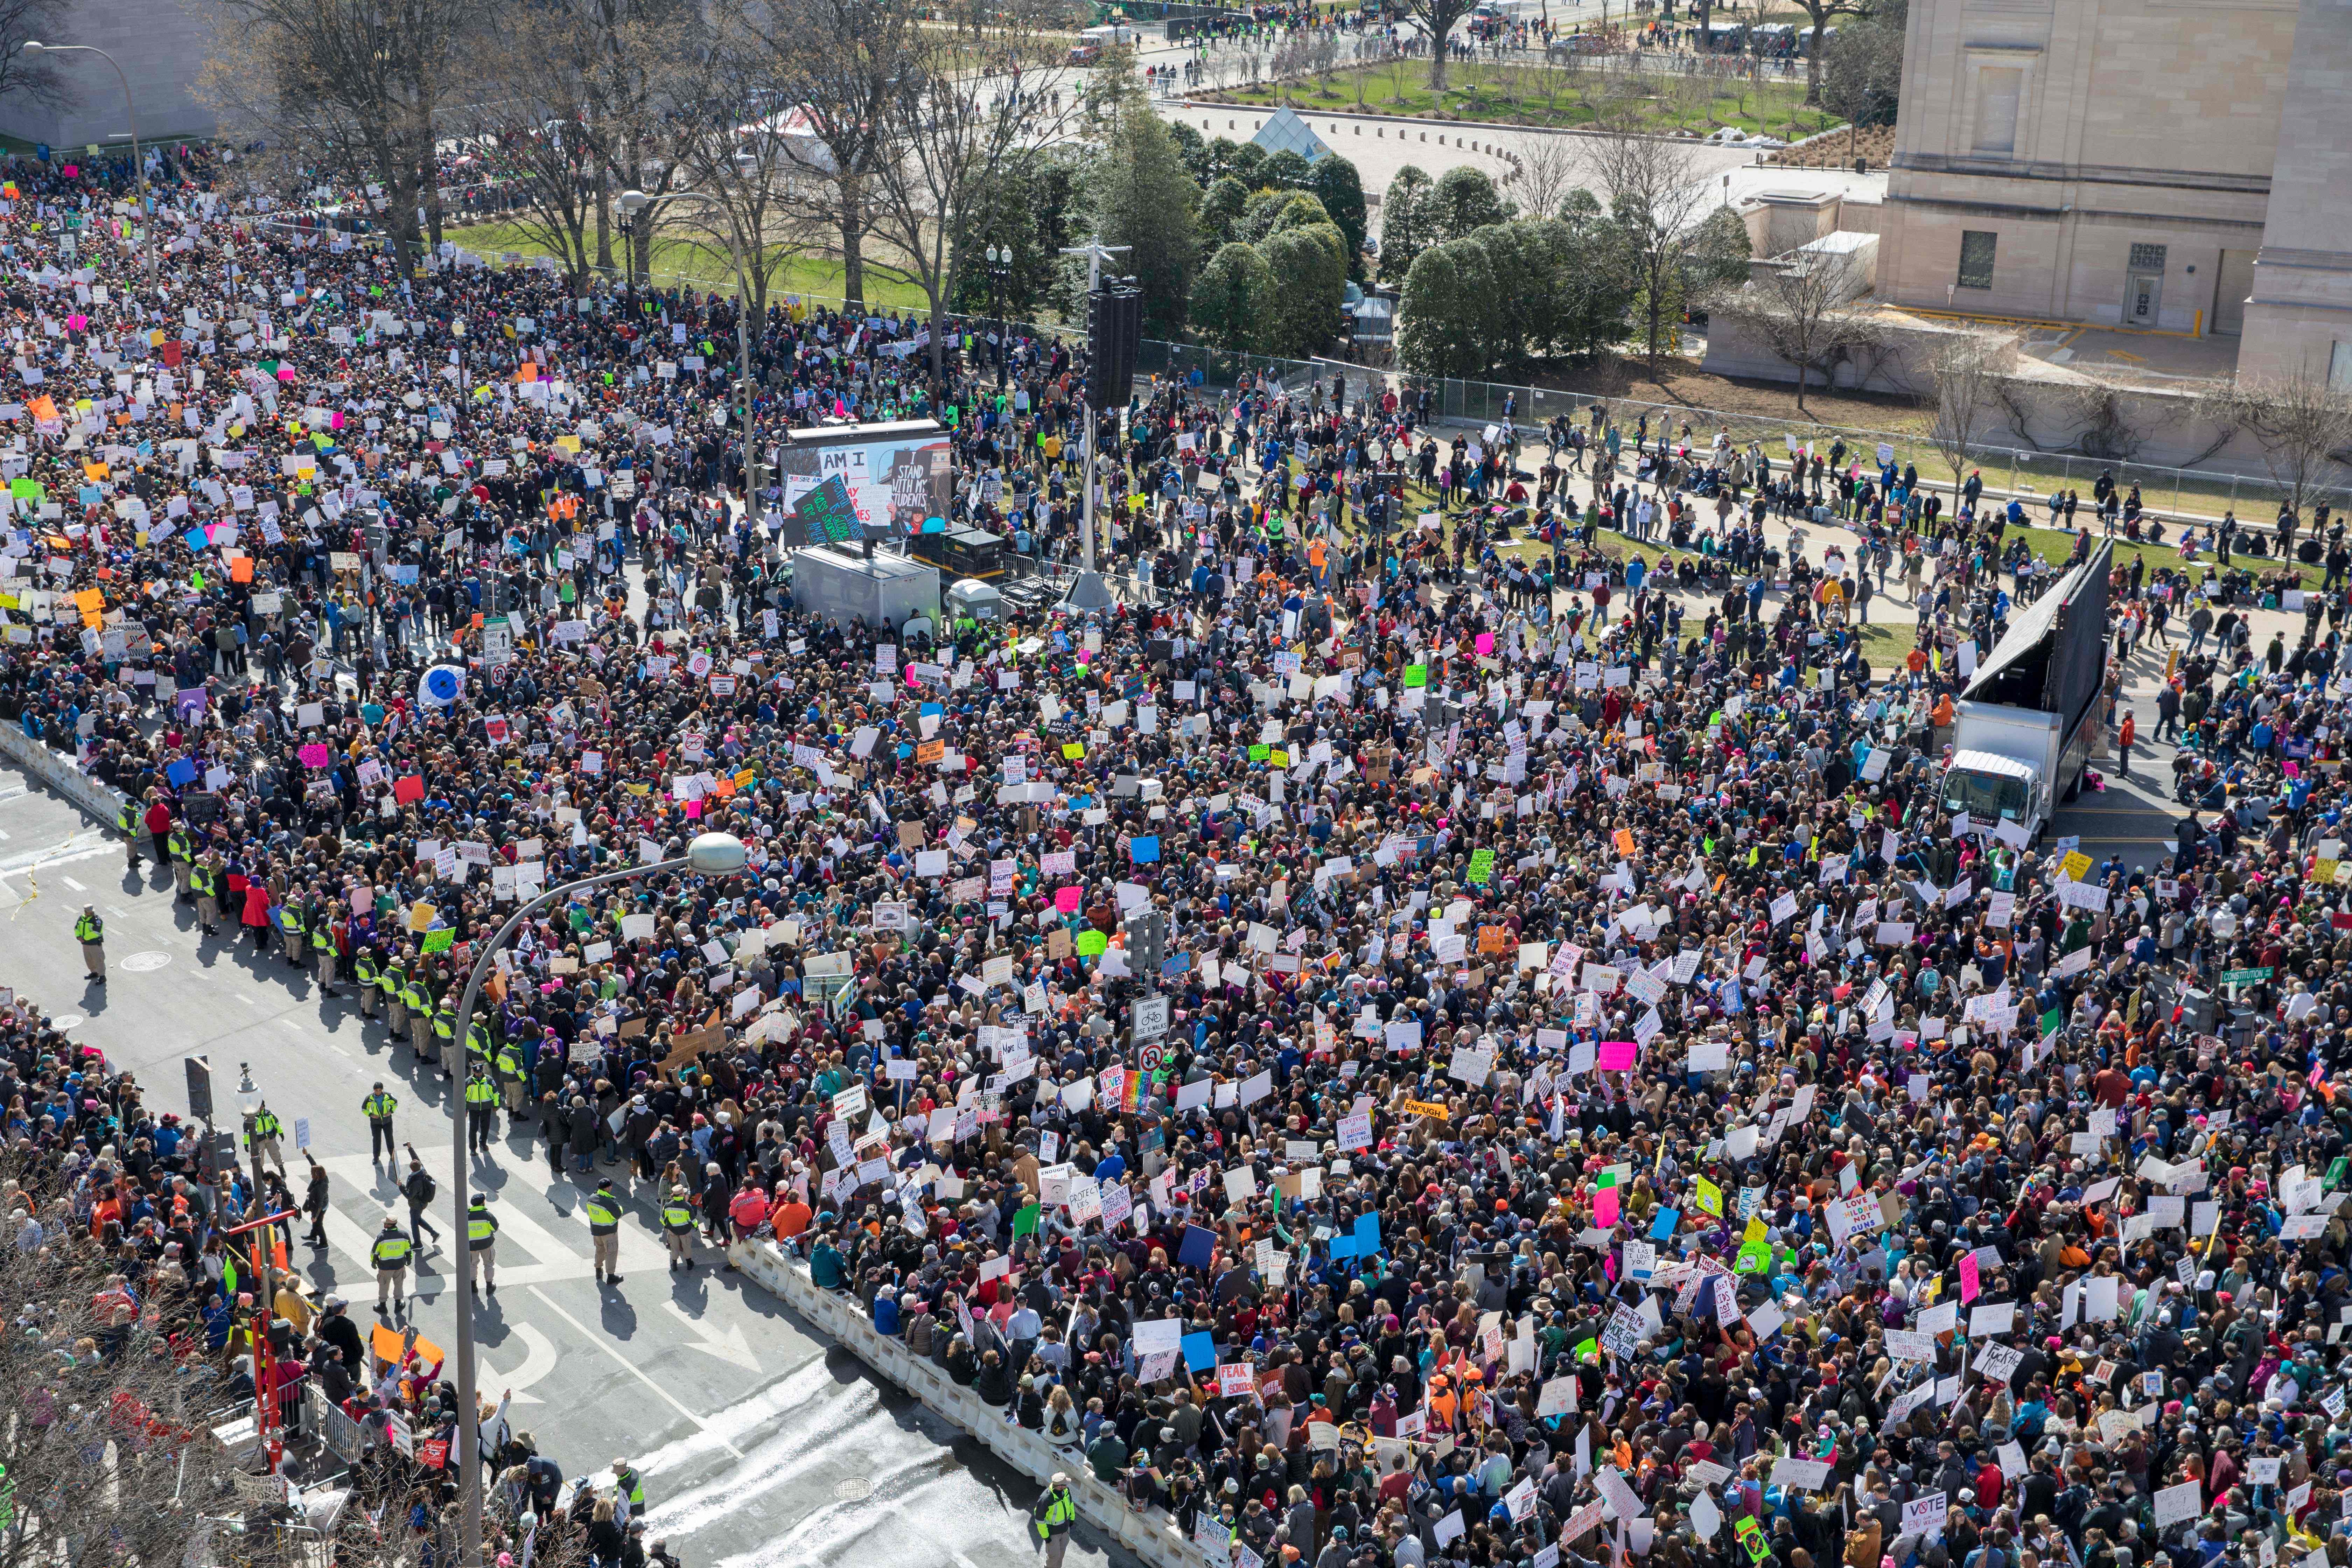 The crowd at the March for Our Lives Rally as seen from the roof of the Newseum in Washington, DC on March 24, 2018. Galvanized by a massacre at a Florida high school, hundreds of thousands of Americans are expected to take to the streets in cities across the United States on Saturday in the biggest protest for gun control in a generation. (ALEX EDELMAN/AFP/Getty Images)